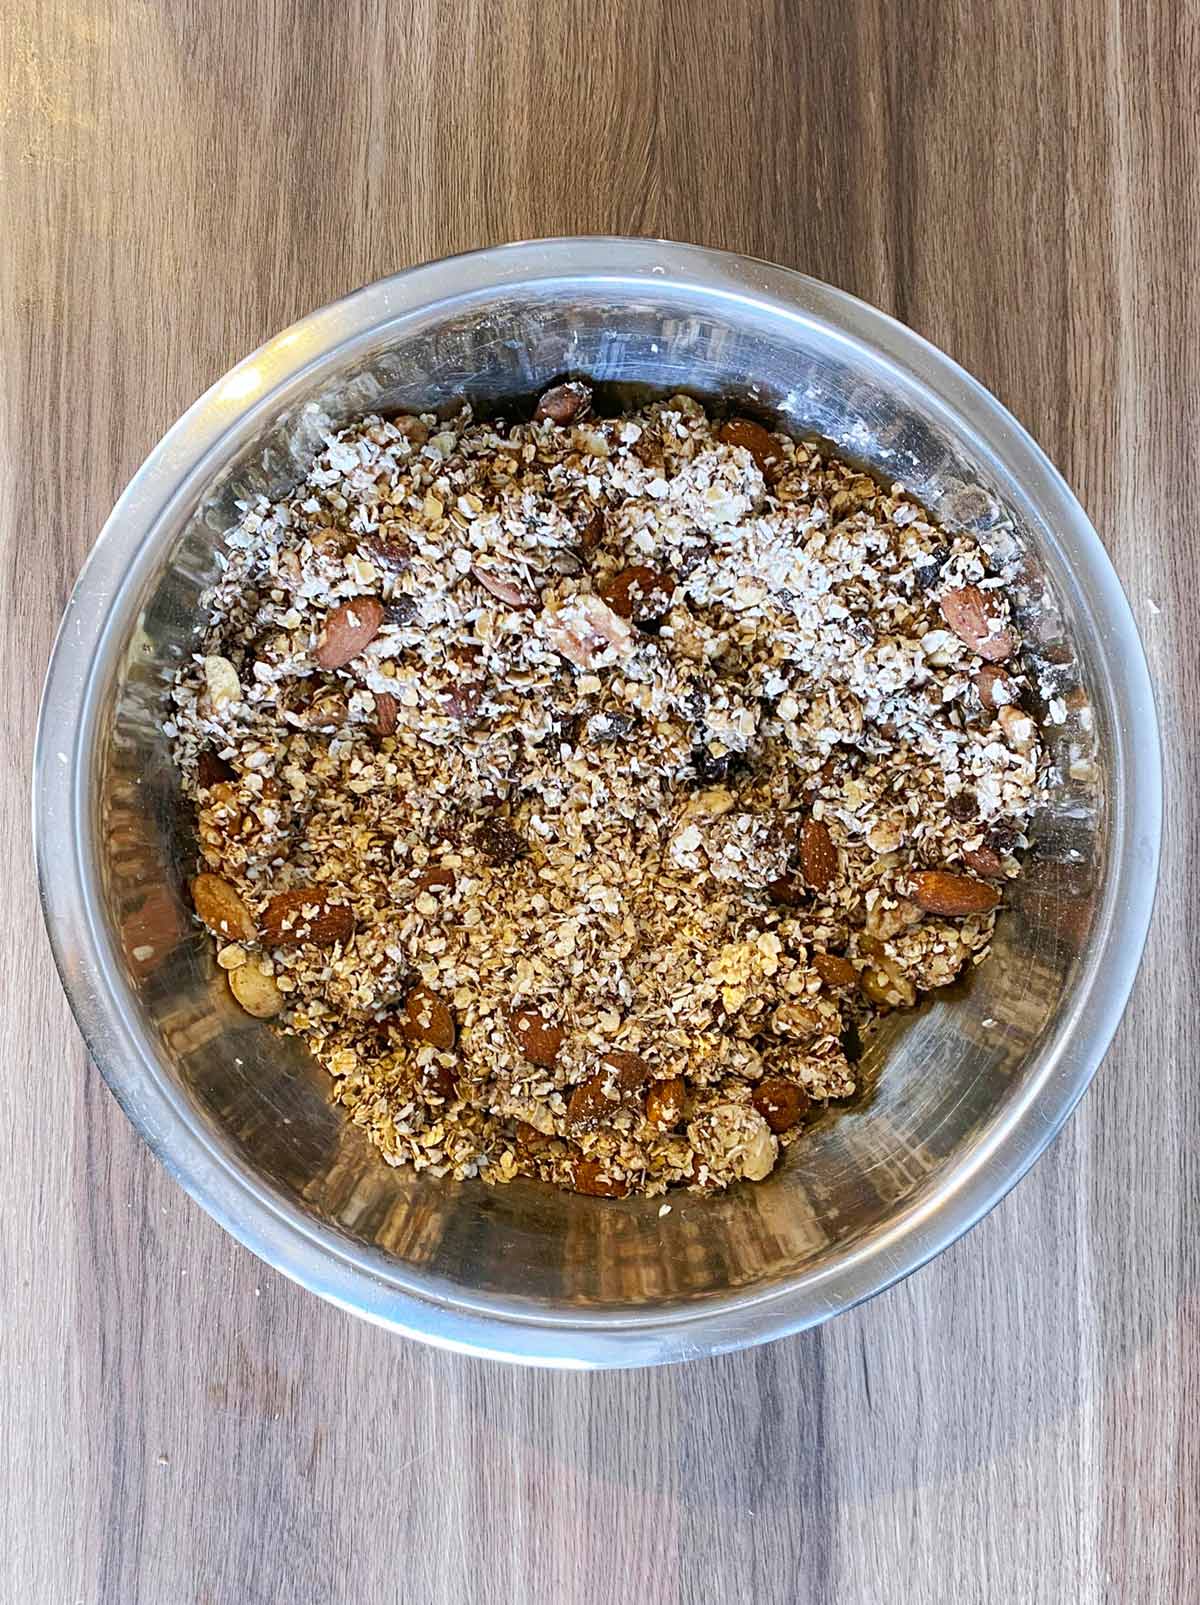 A bowl of granola ingredients all mixed together.